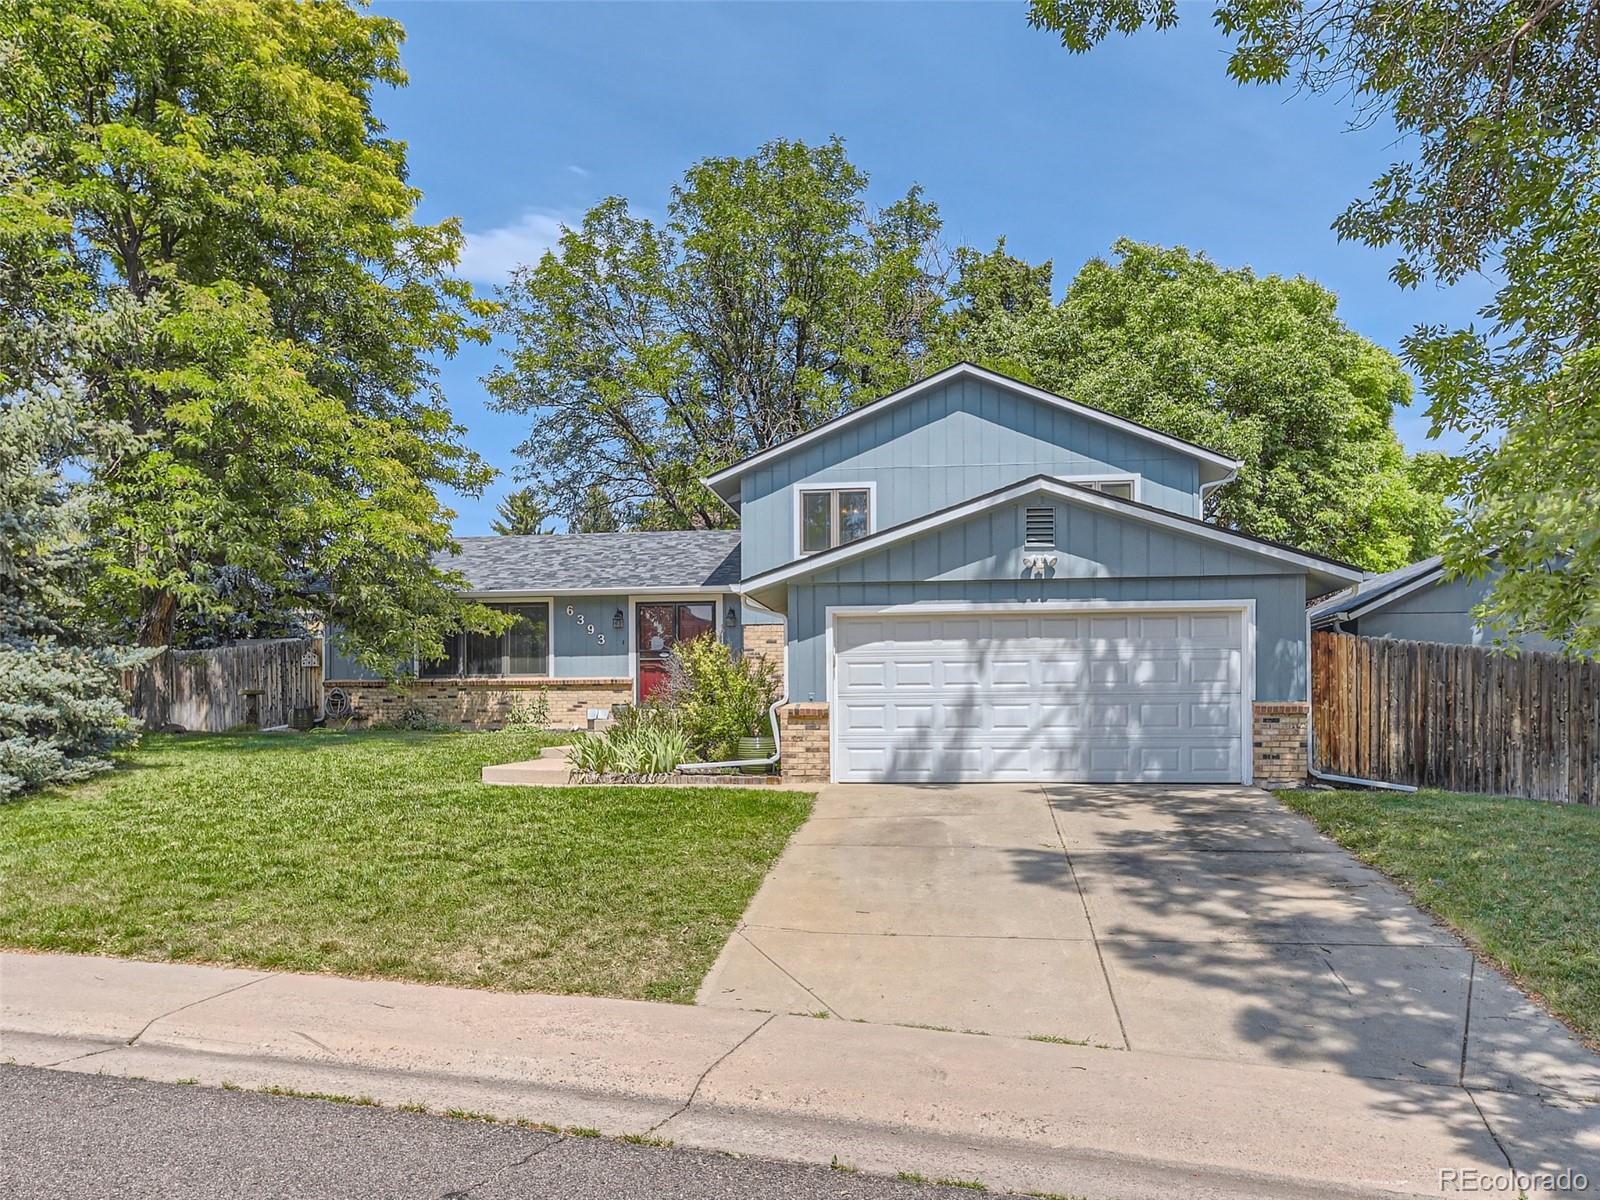 Report Image for 6393 W Canyon Avenue,Littleton, Colorado